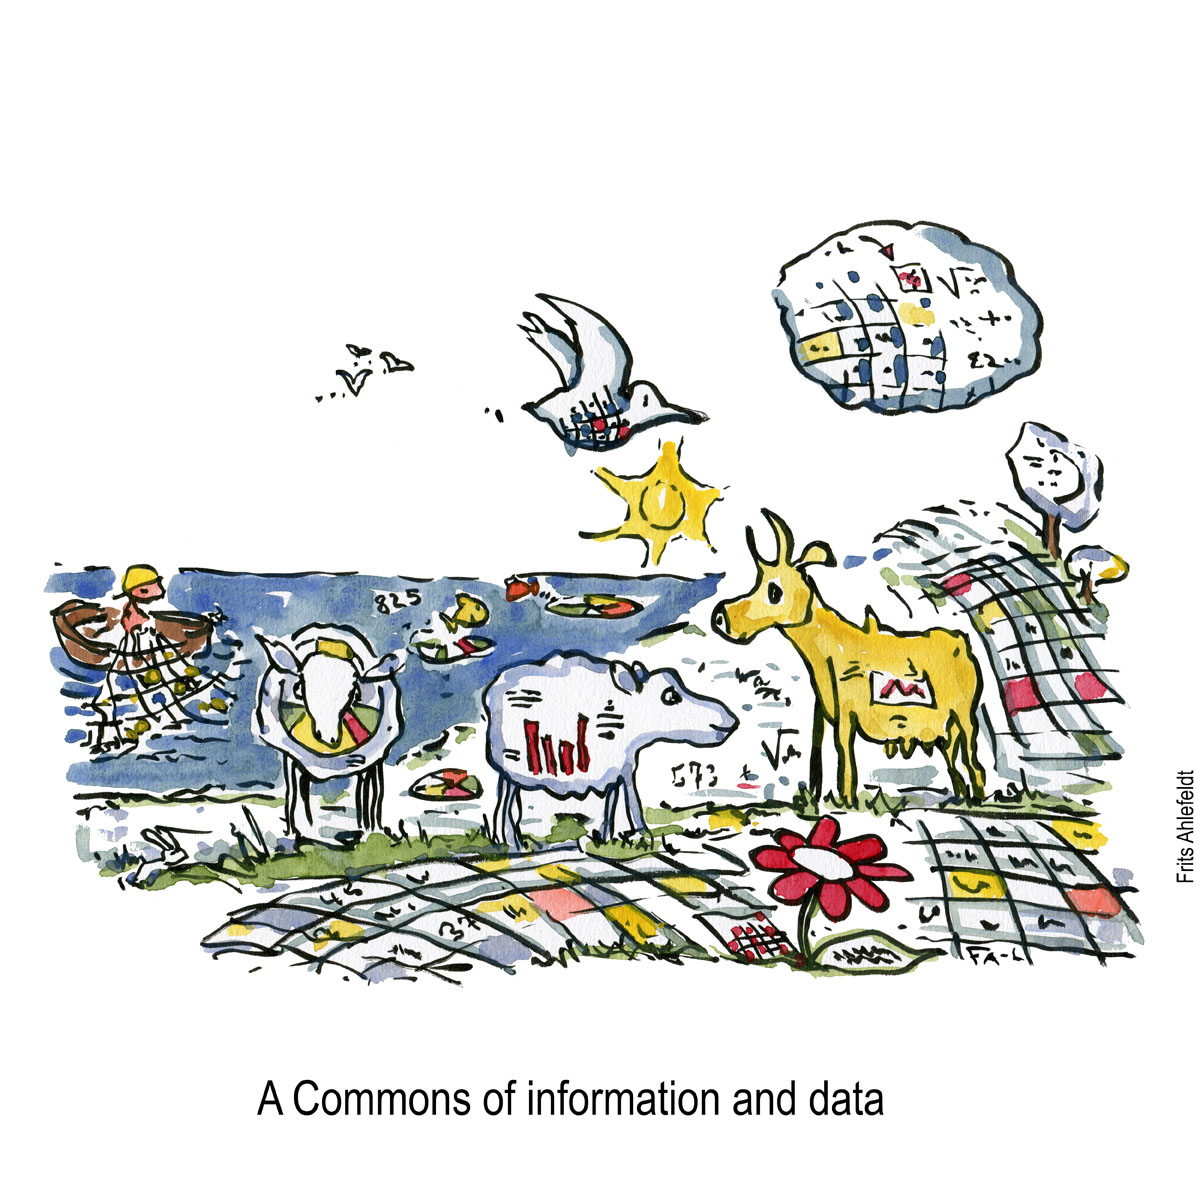 Illustration of a commons with data animals and information creatures moving around. Landscapes of understanding drawing by Frits Ahlefeldt